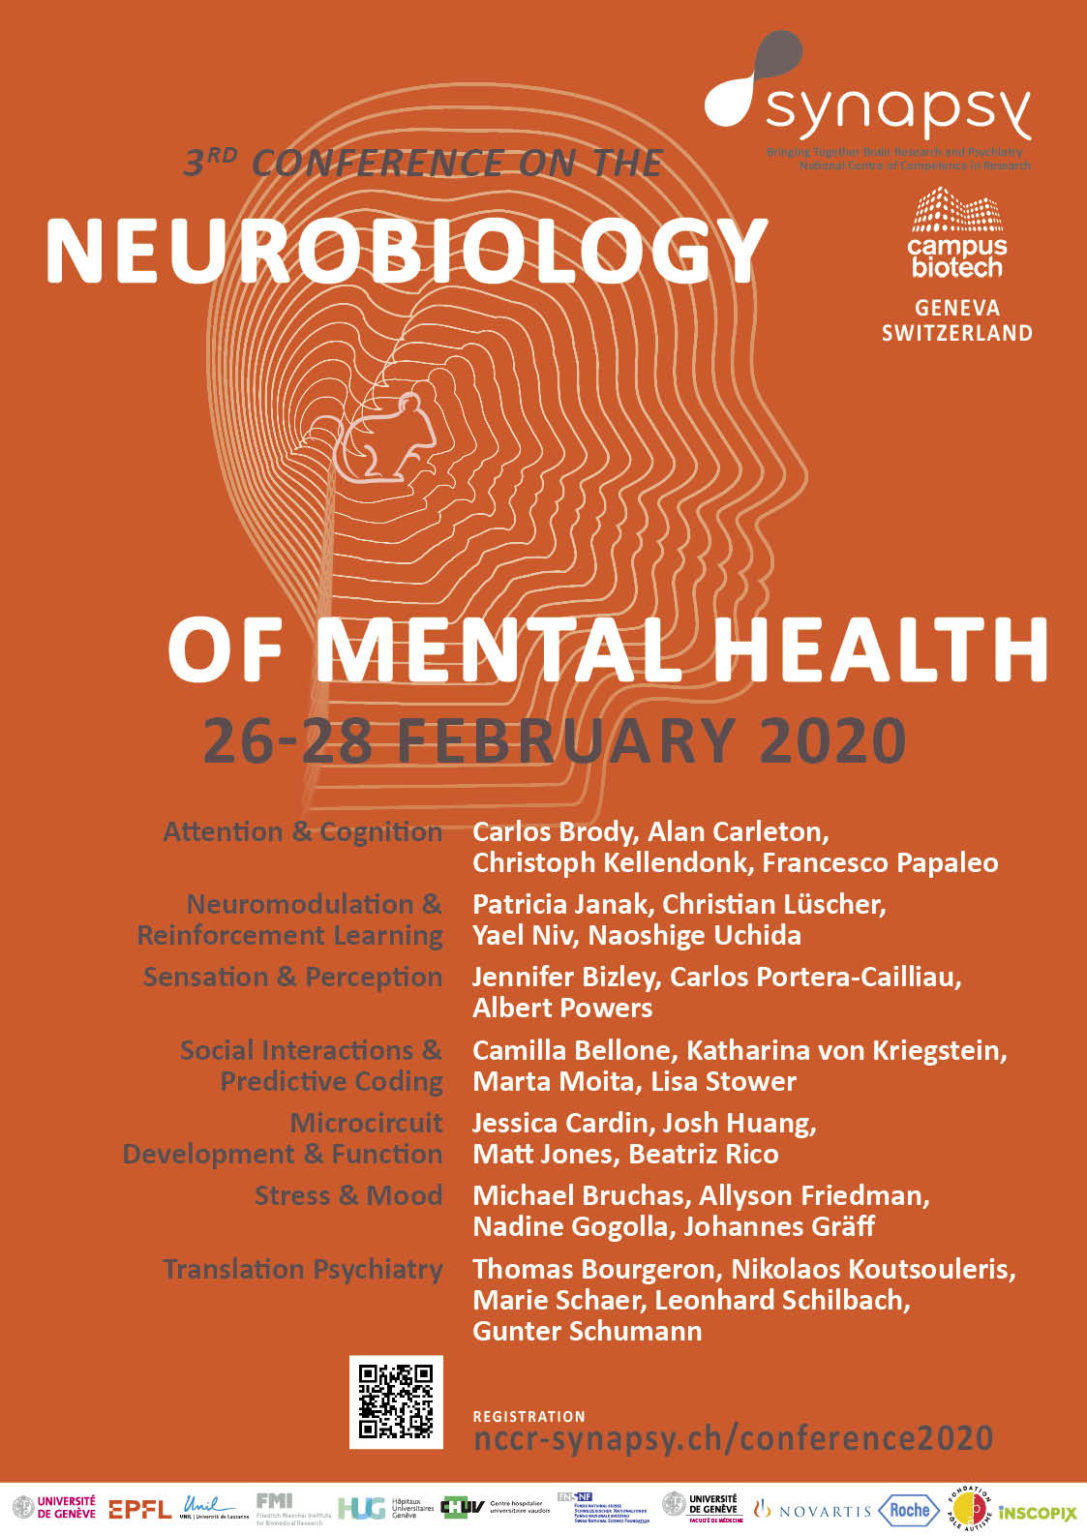 Invitation 3rd Synapsy Conference on the Neurobiology of Mental Health